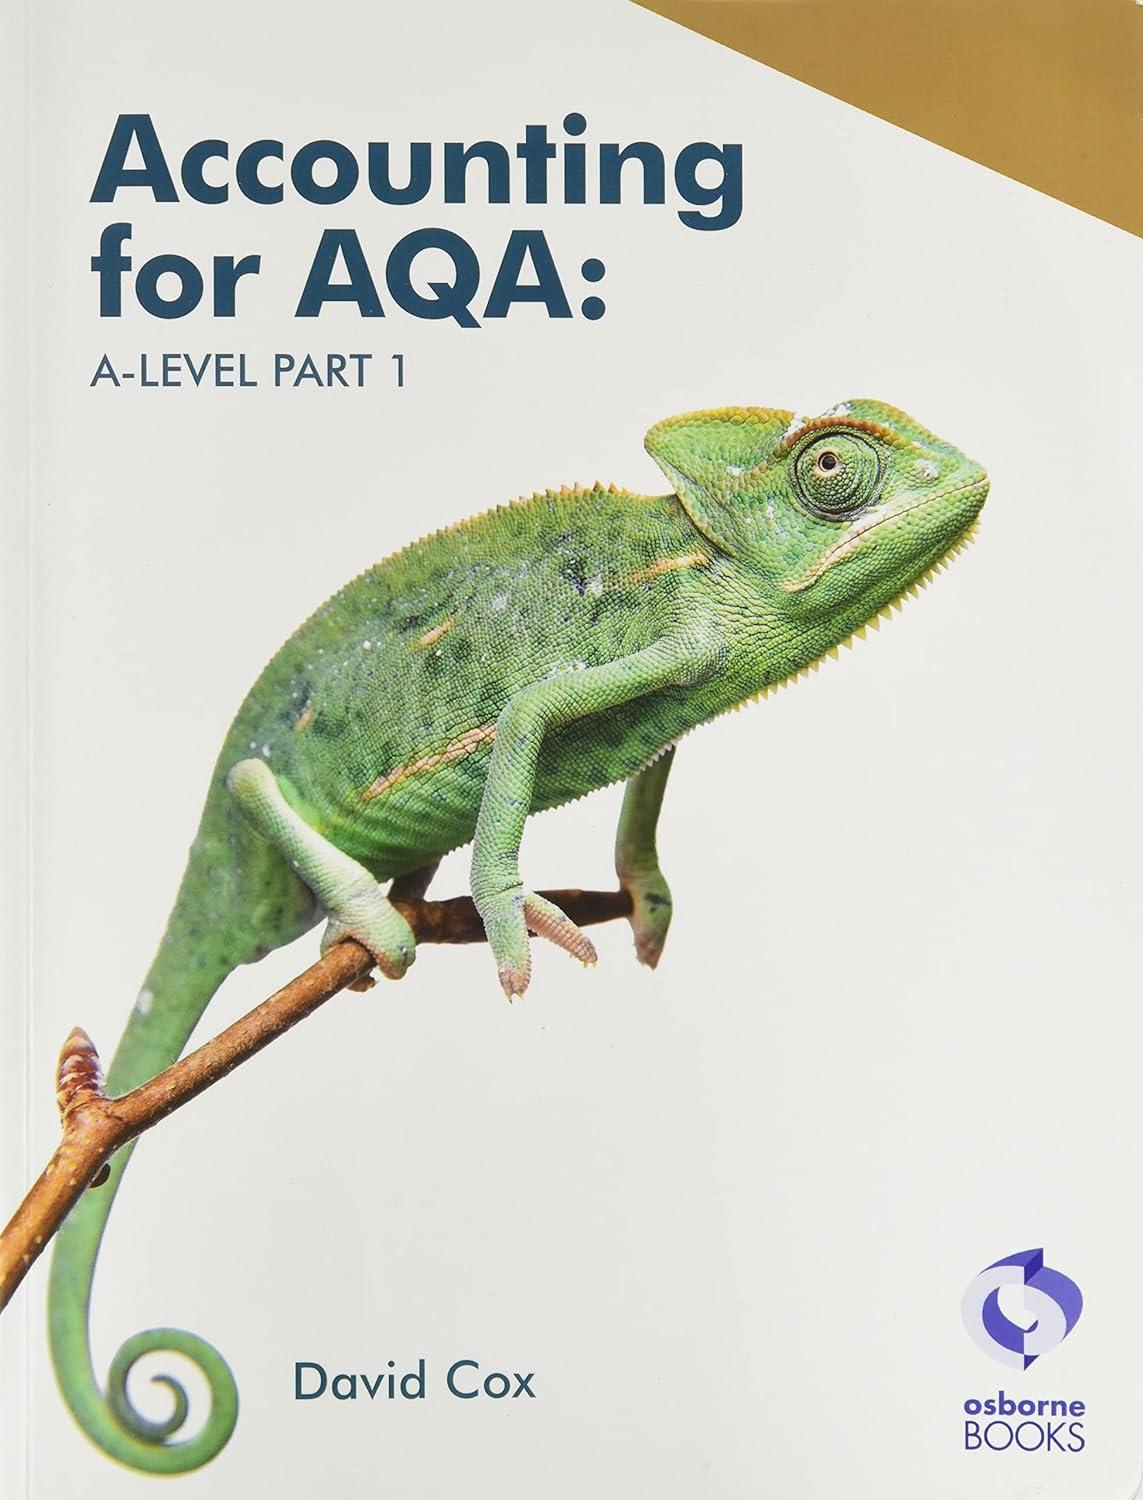 accounting for aqa a level part 1 1st edition david cox 1911198890, 978-1911198895